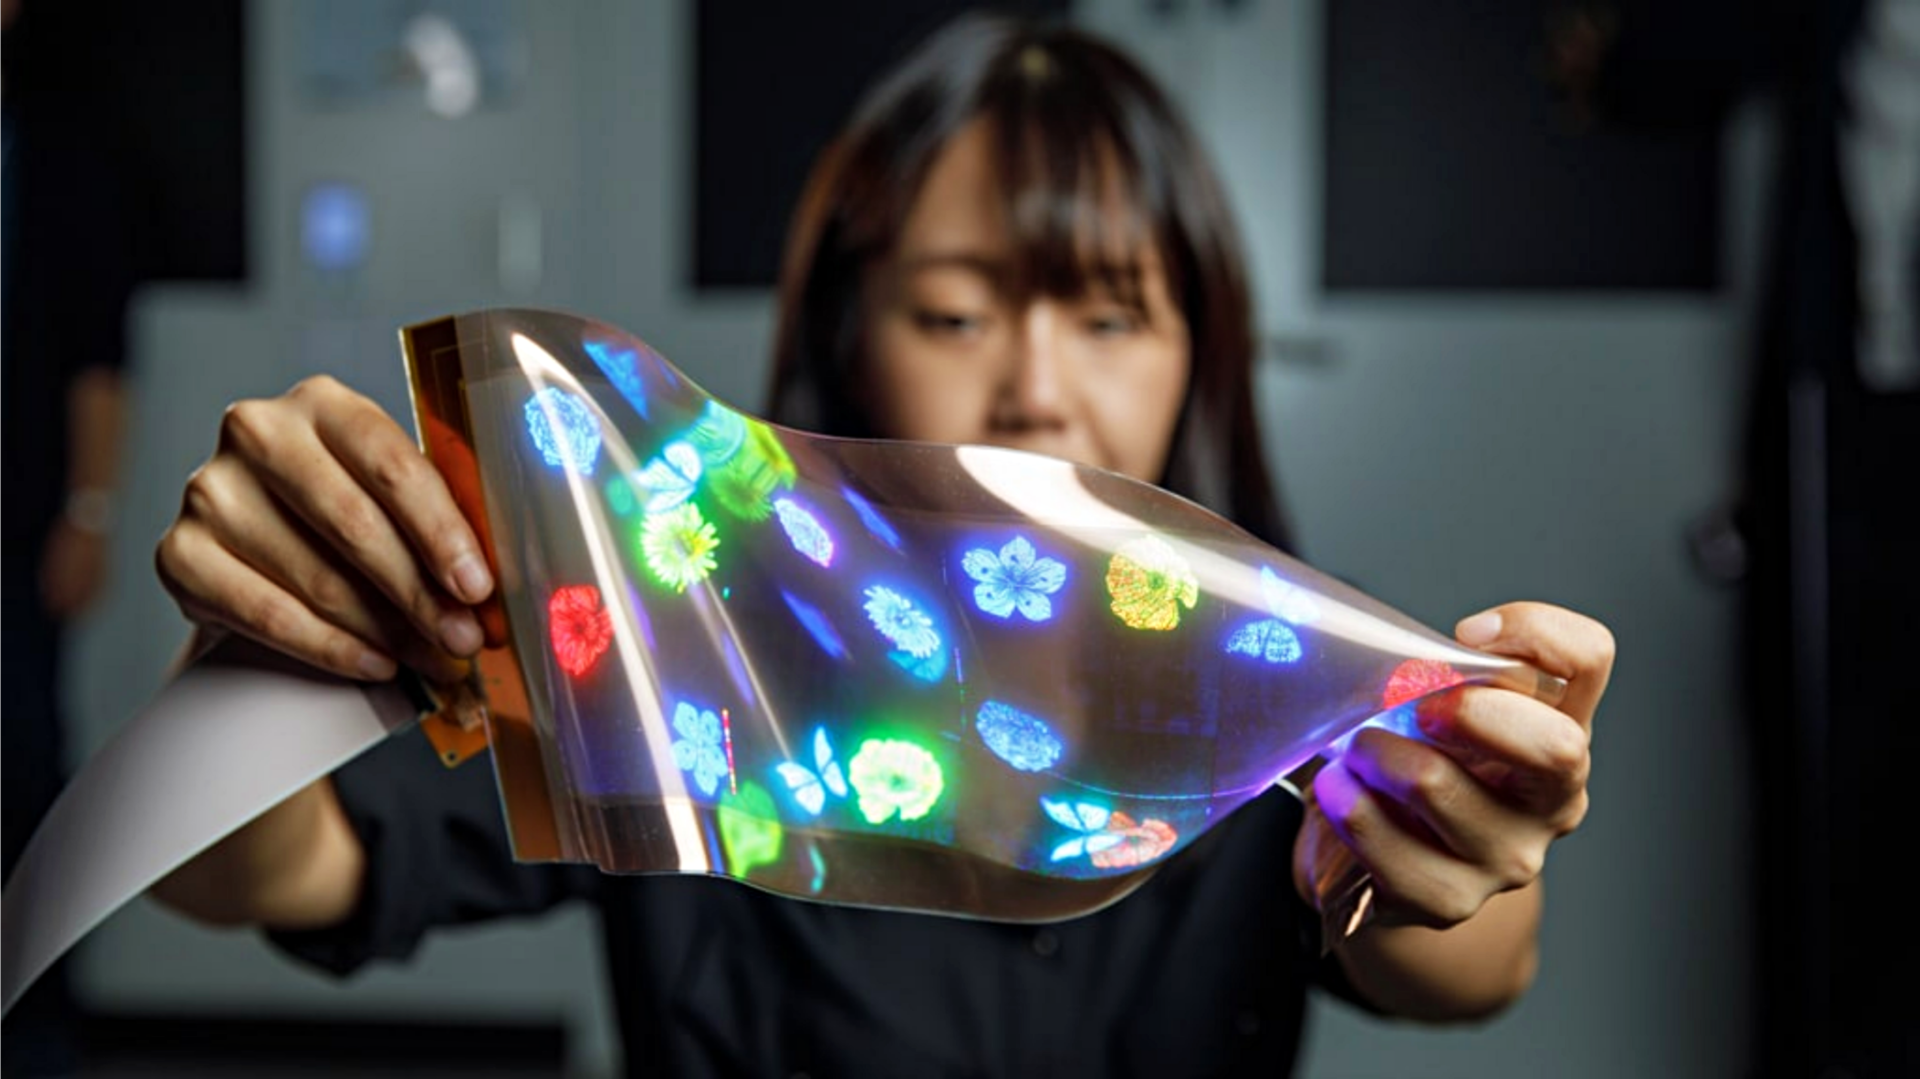 LG showcases world's first high-resolution stretchable display